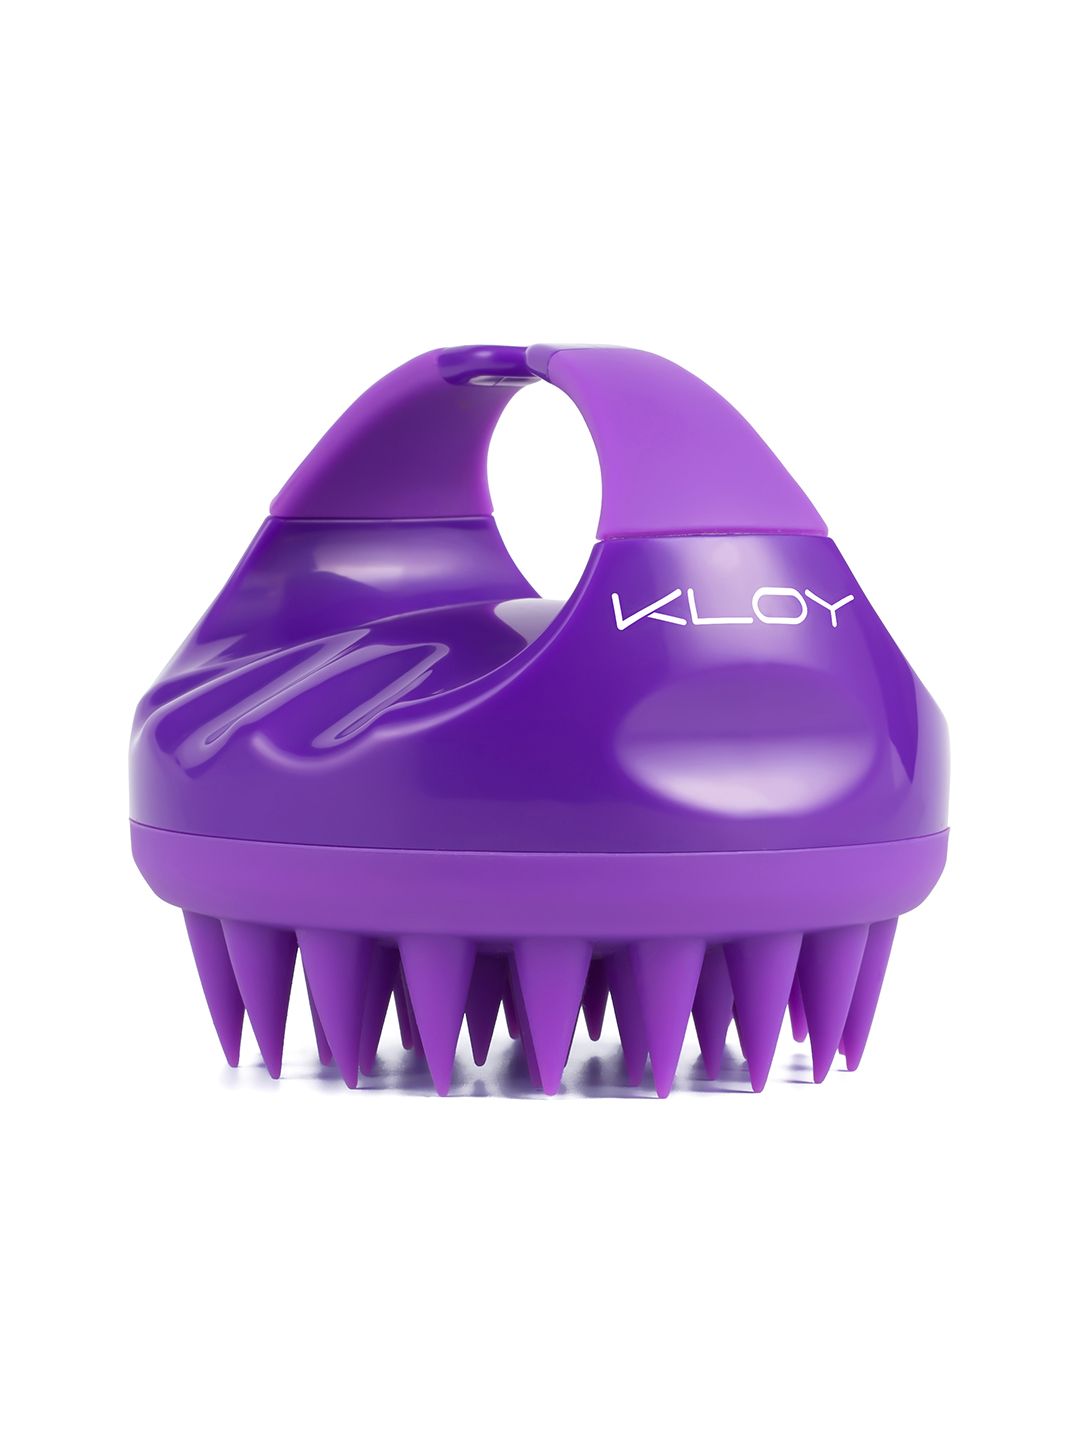 KLOY Purple Hair Scalp Massager Exfoliator Shampoo Brush With Soft Silicone Bristles Price in India